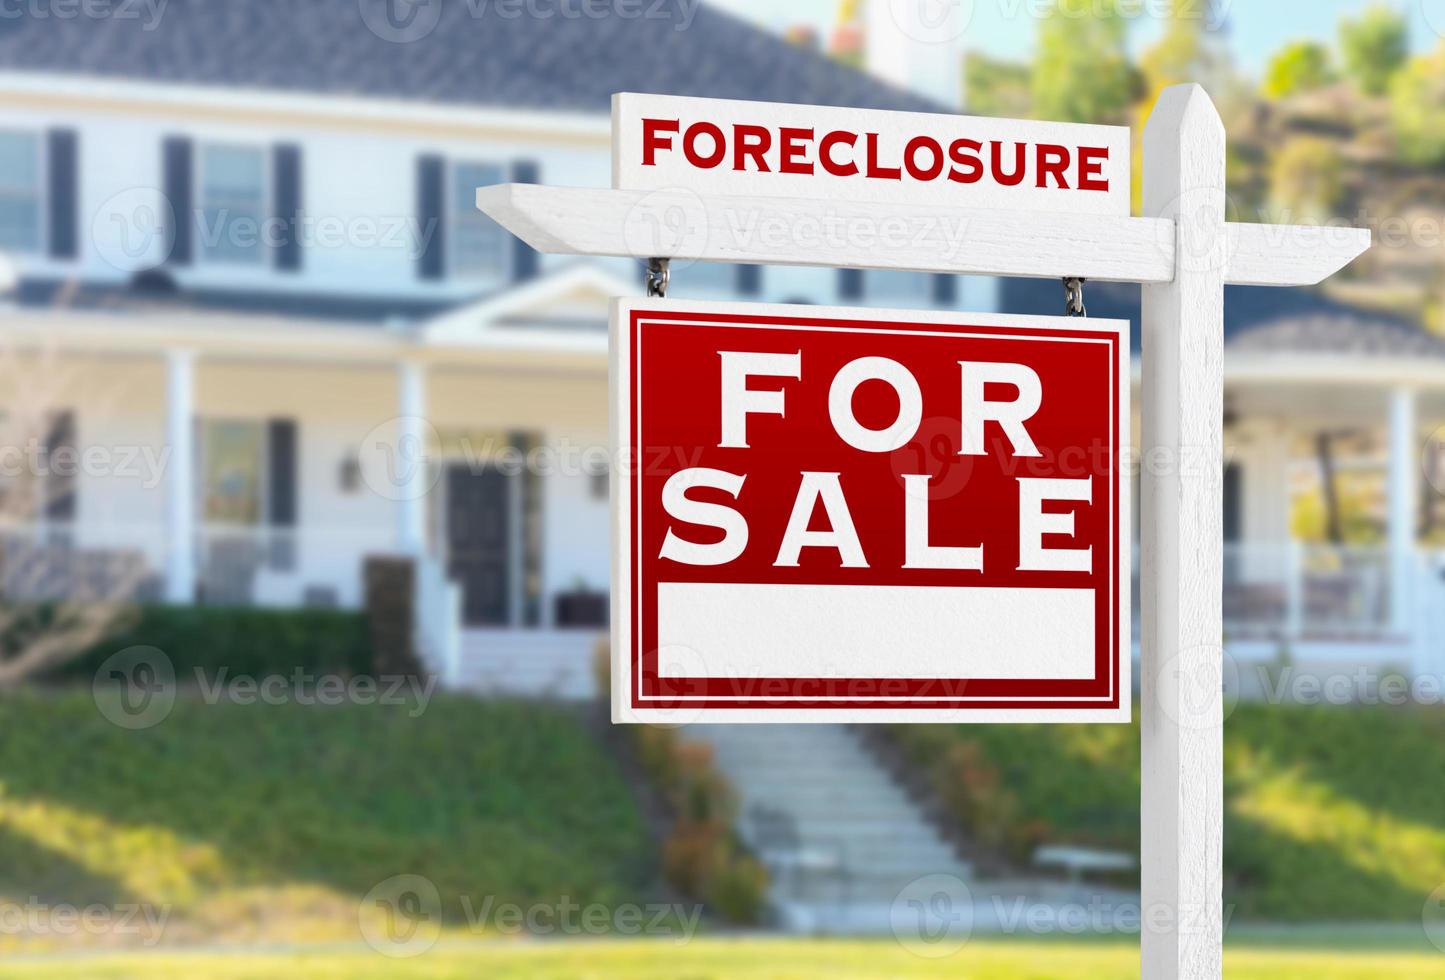 Left Facing Foreclosure For Sale Real Estate Sign in Front of House. photo